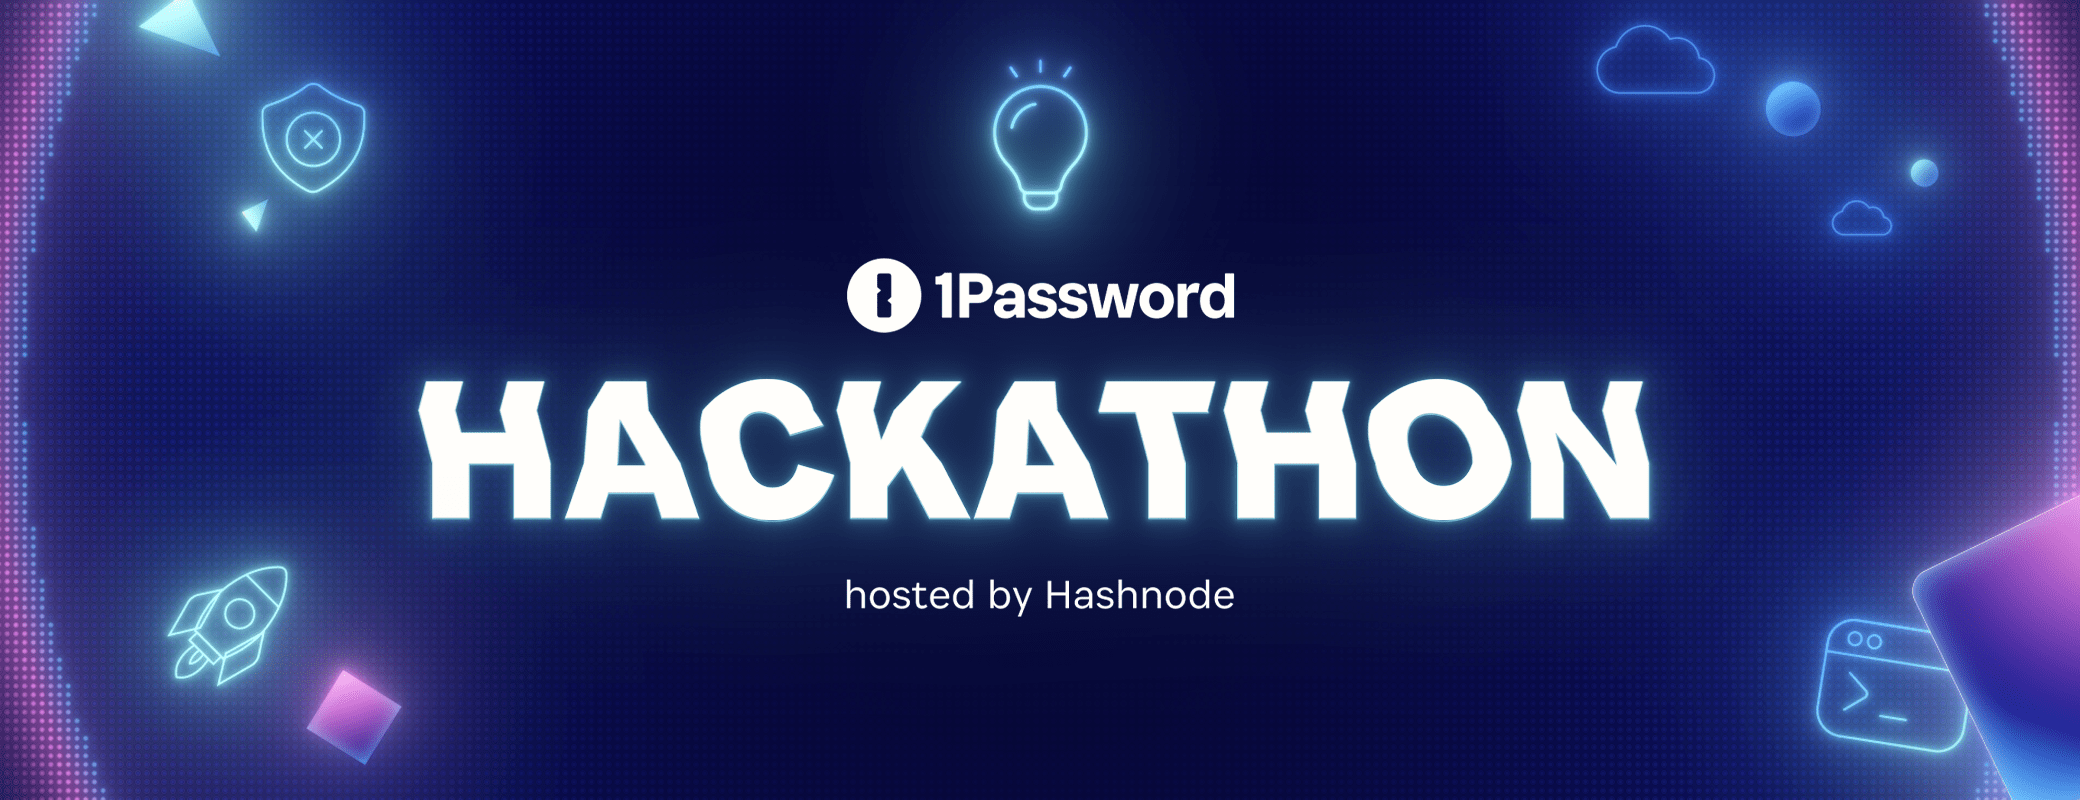 Join the 1Password Hackathon hosted by Hashnode and compete for $10,000 in prizes